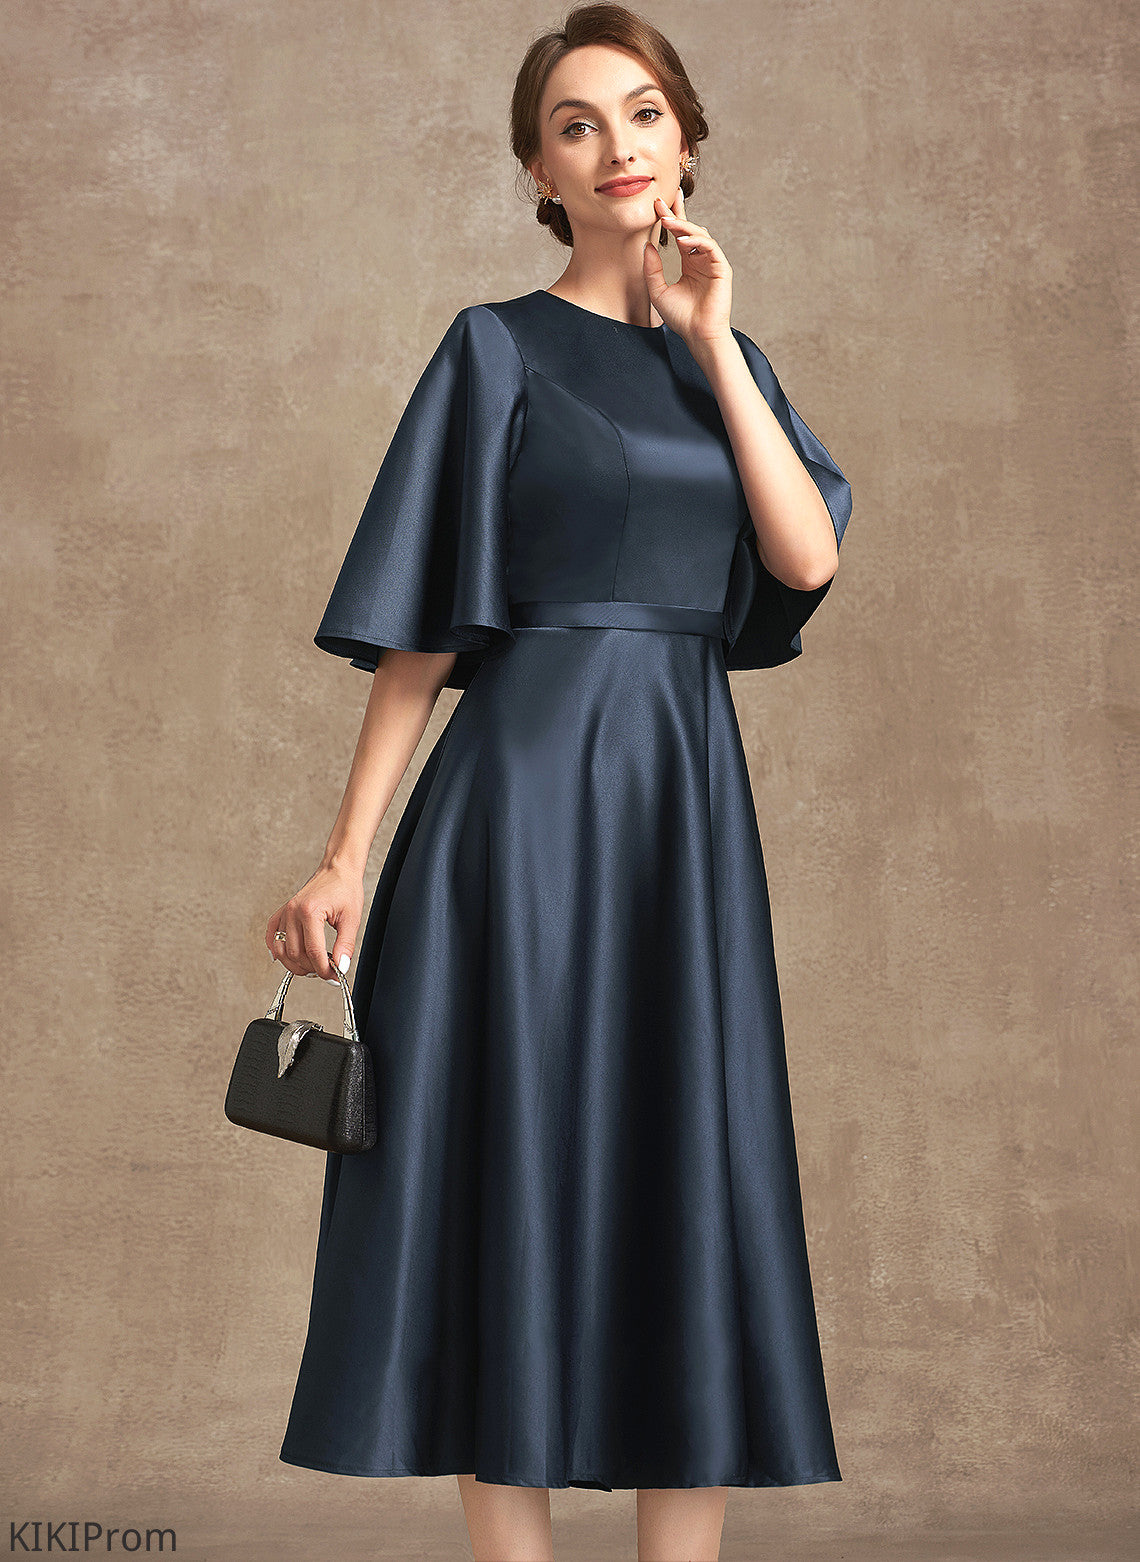 Bride Satin Tea-Length the of Dress Libby Mother Mother of the Bride Dresses Neck A-Line Scoop